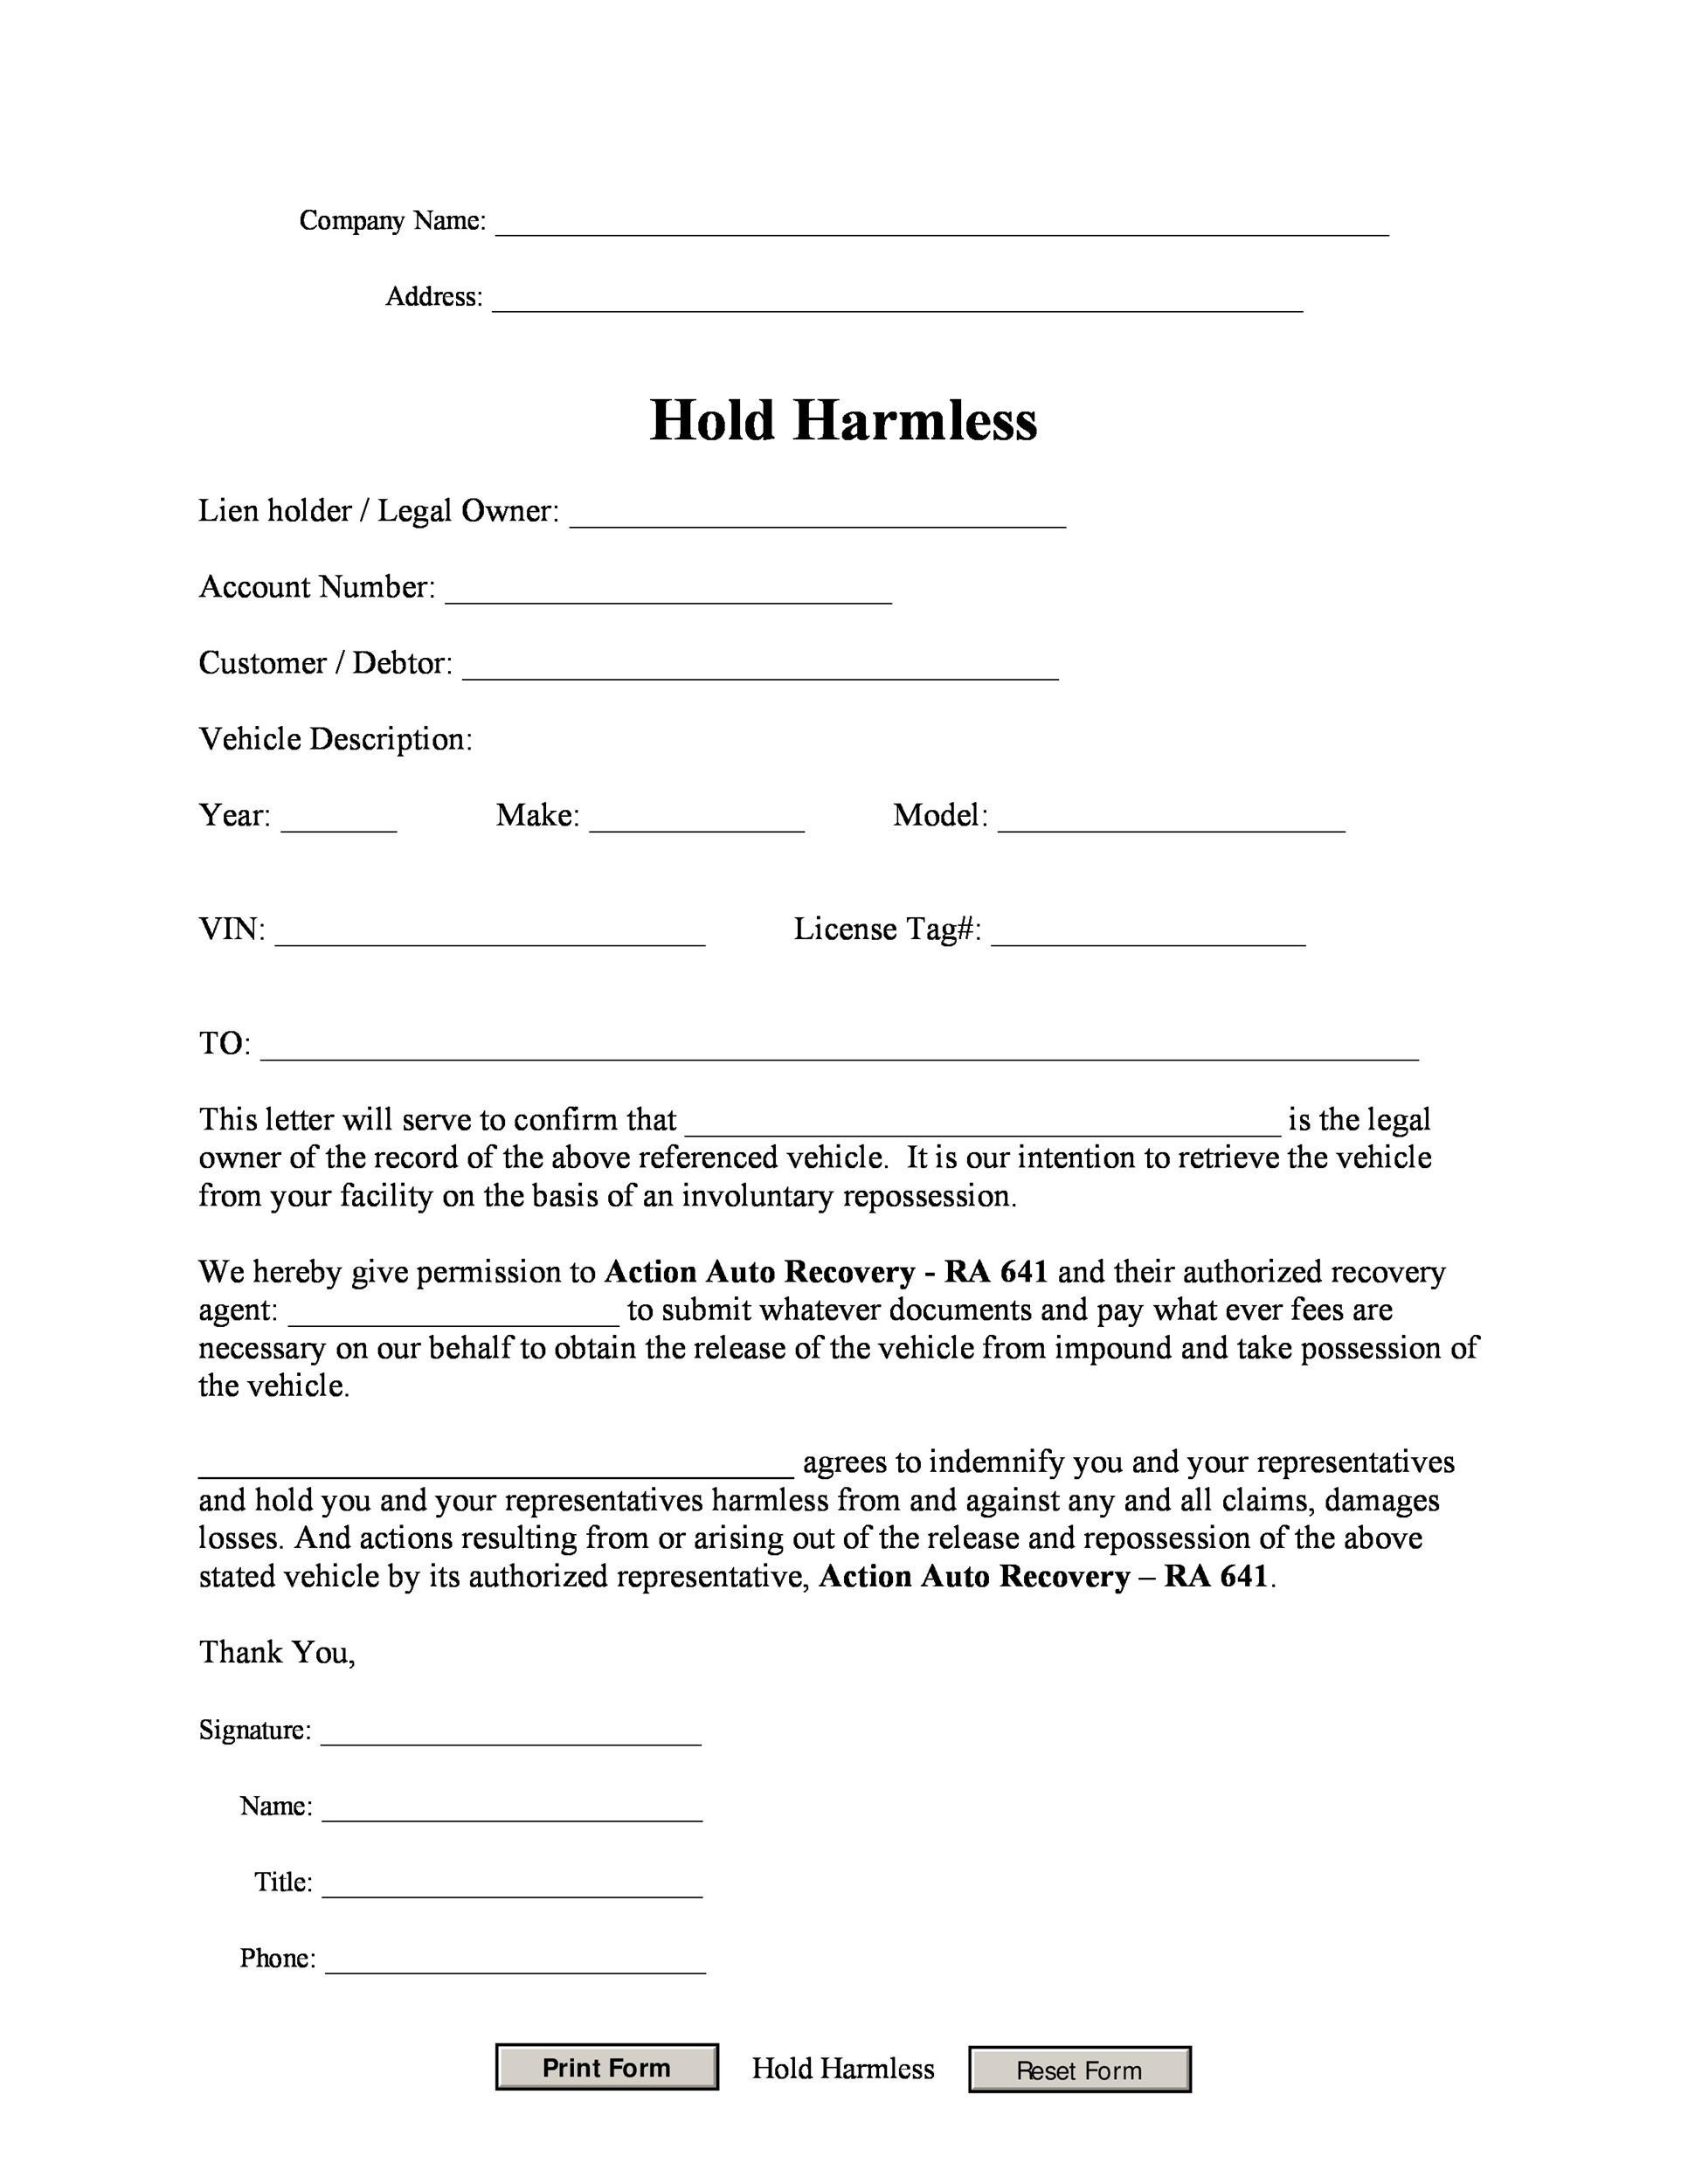 Free Hold Harmless Agreement Template 17